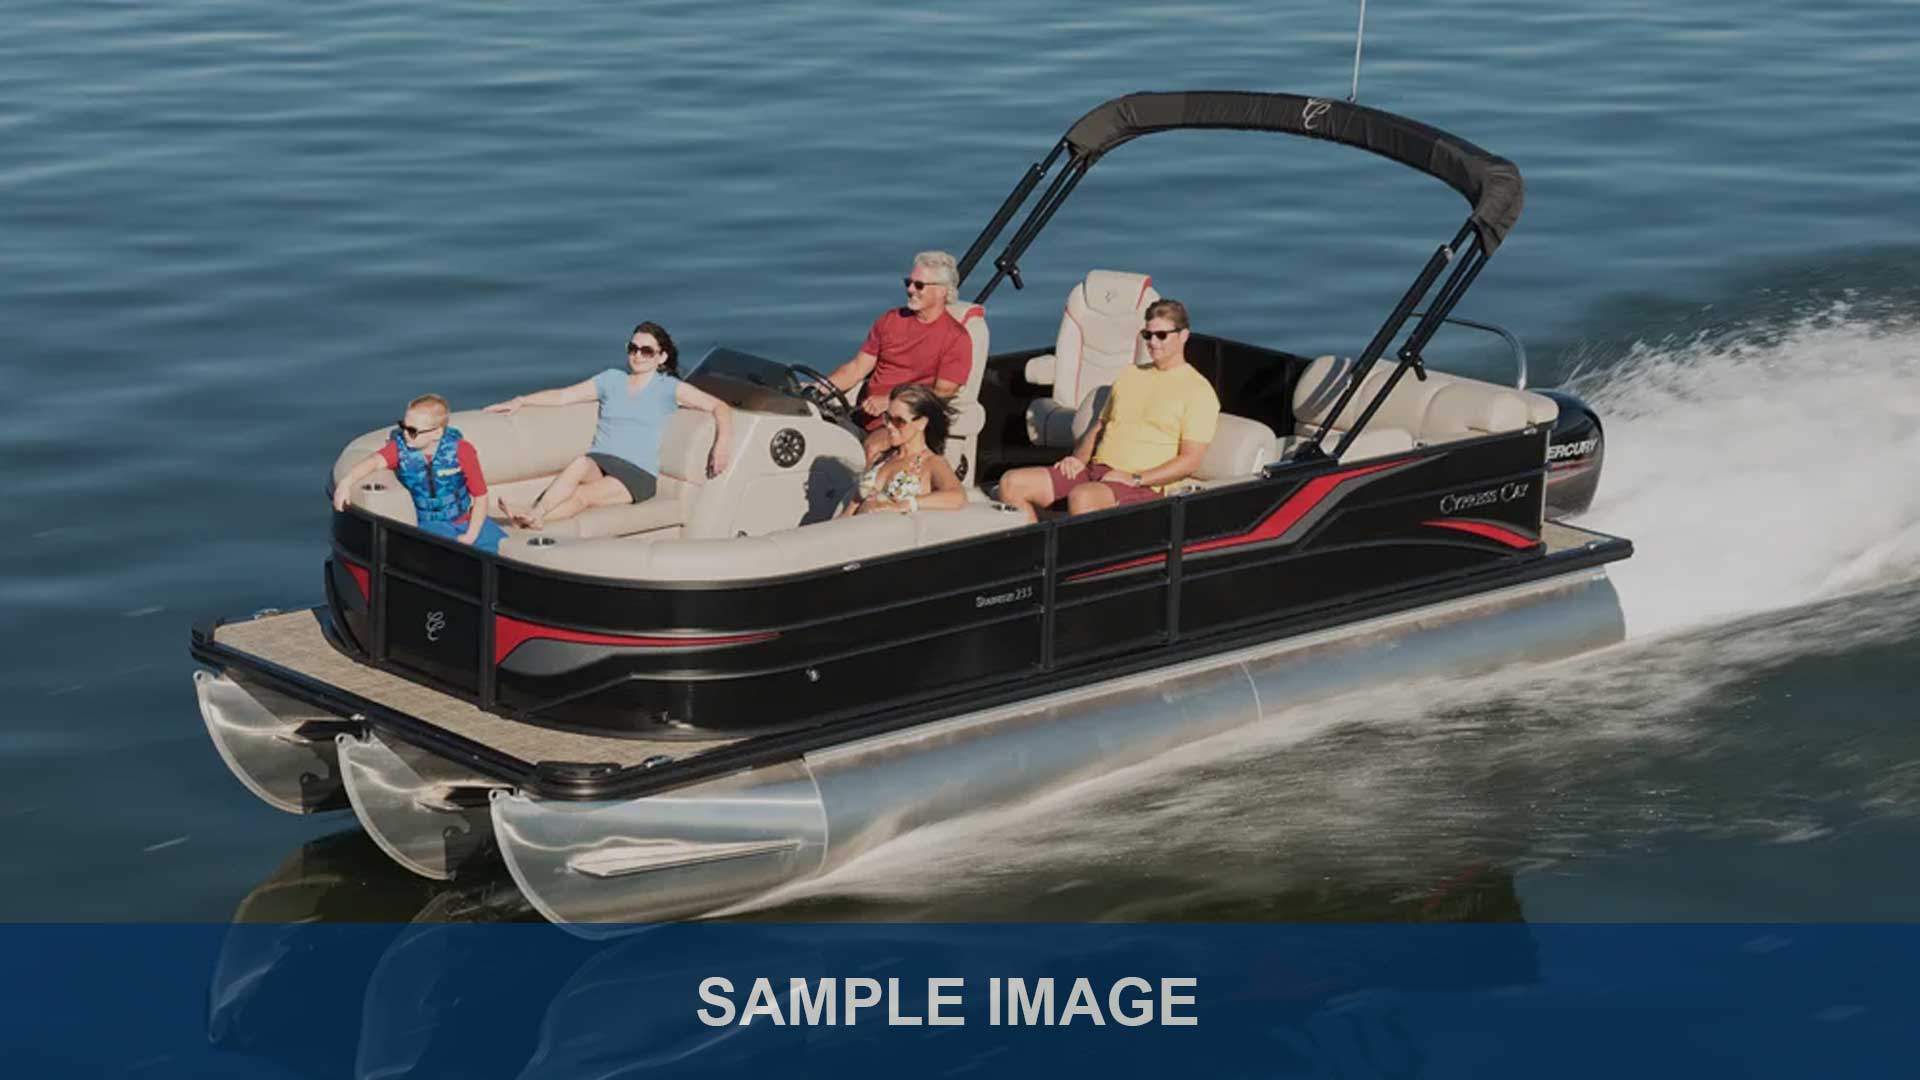 LICENSE TO CHILL (22 FT Pontoon 115 HP - Fishing or Cruising)